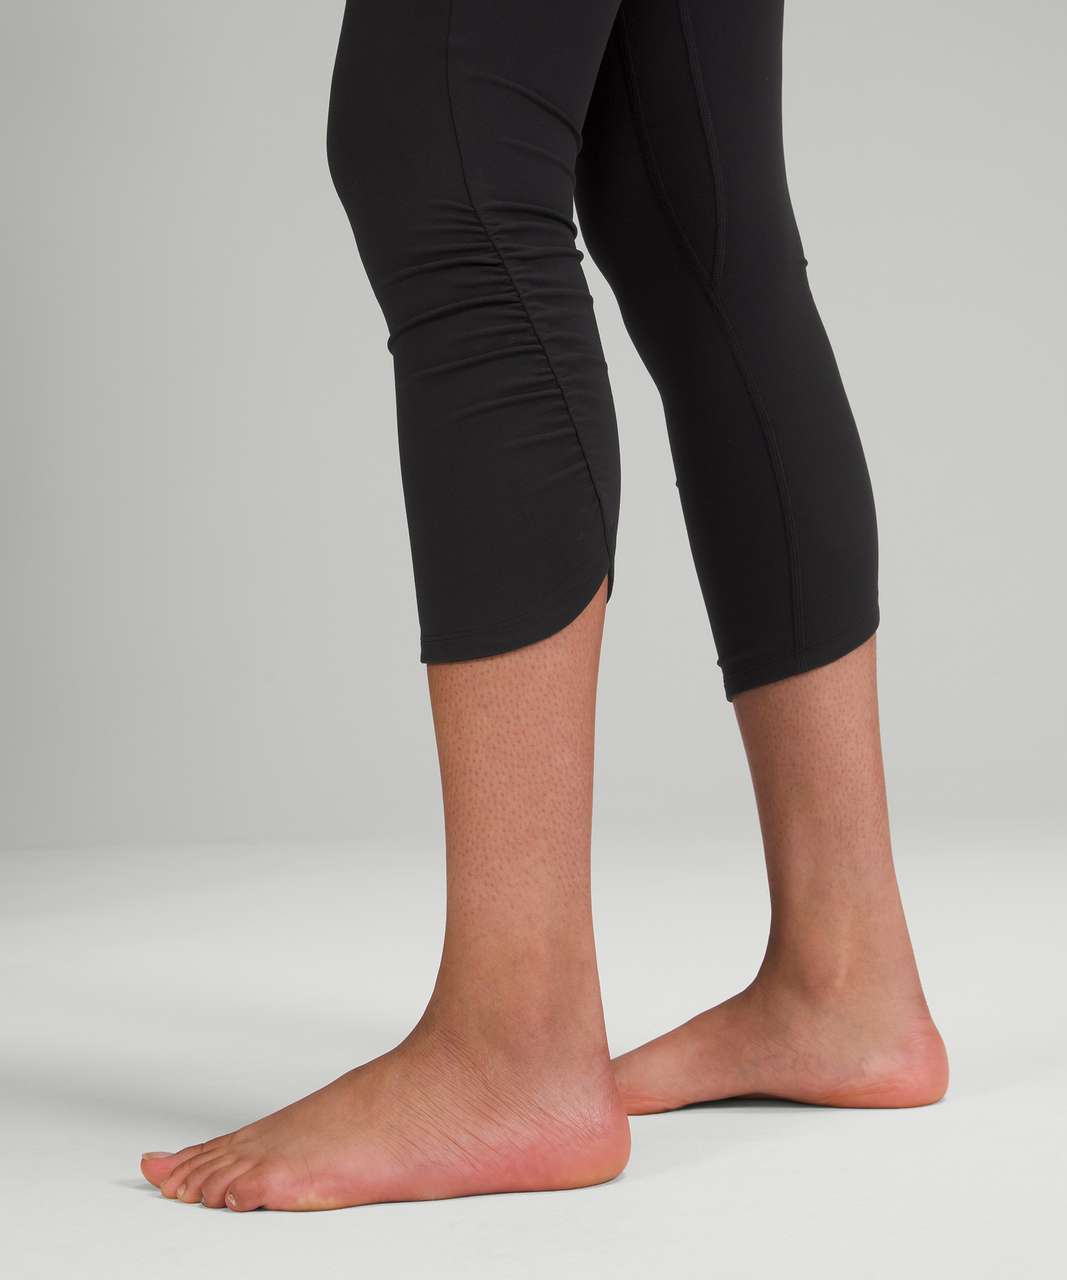 Lululemon Cropped Leggings With Ruched Sides  Clothes design, Knee length  leggings, Cropped leggings